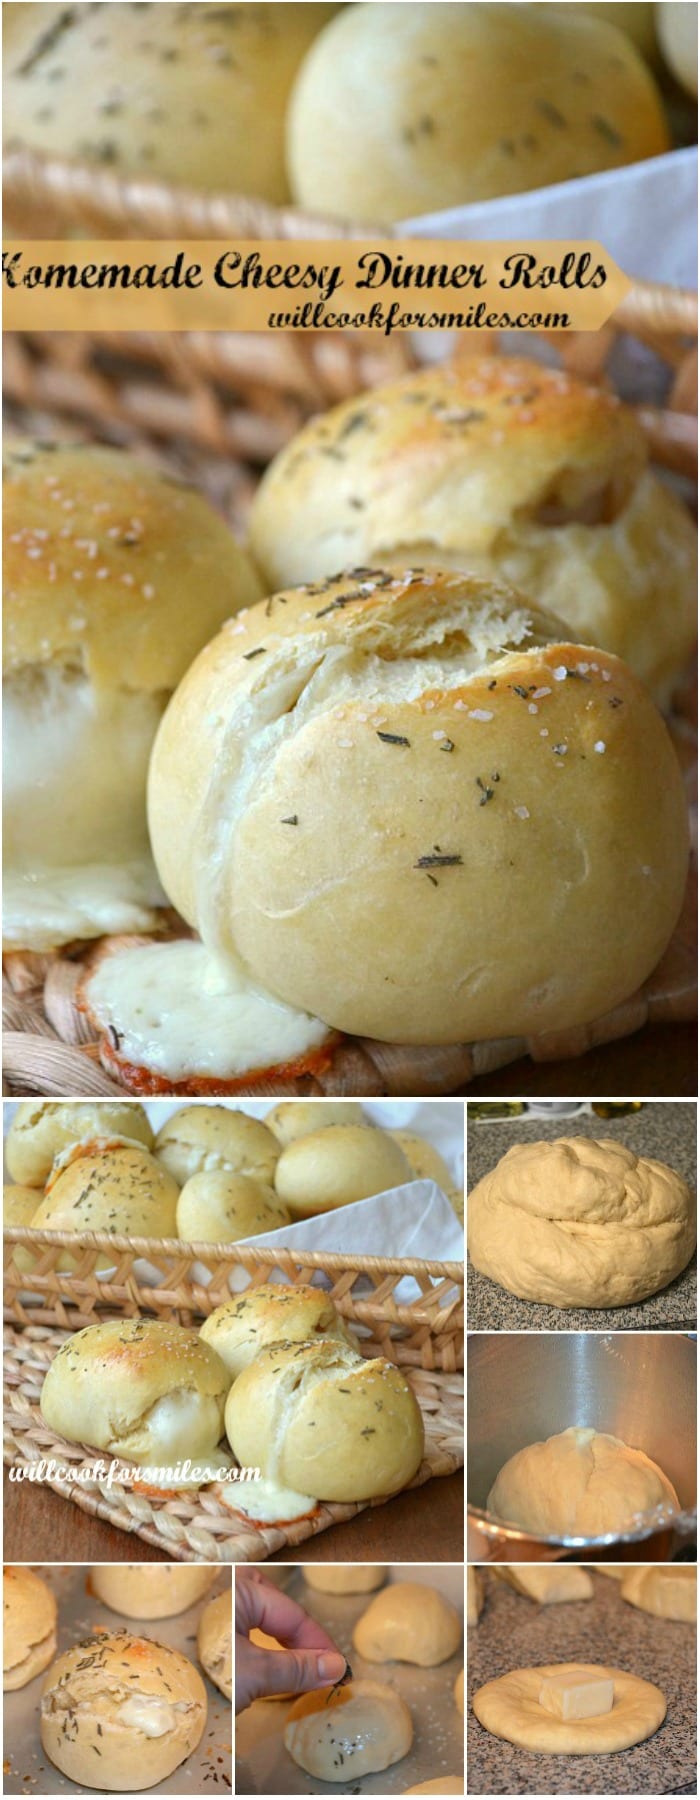 dinner rolls with cheese coming out of the top of them 